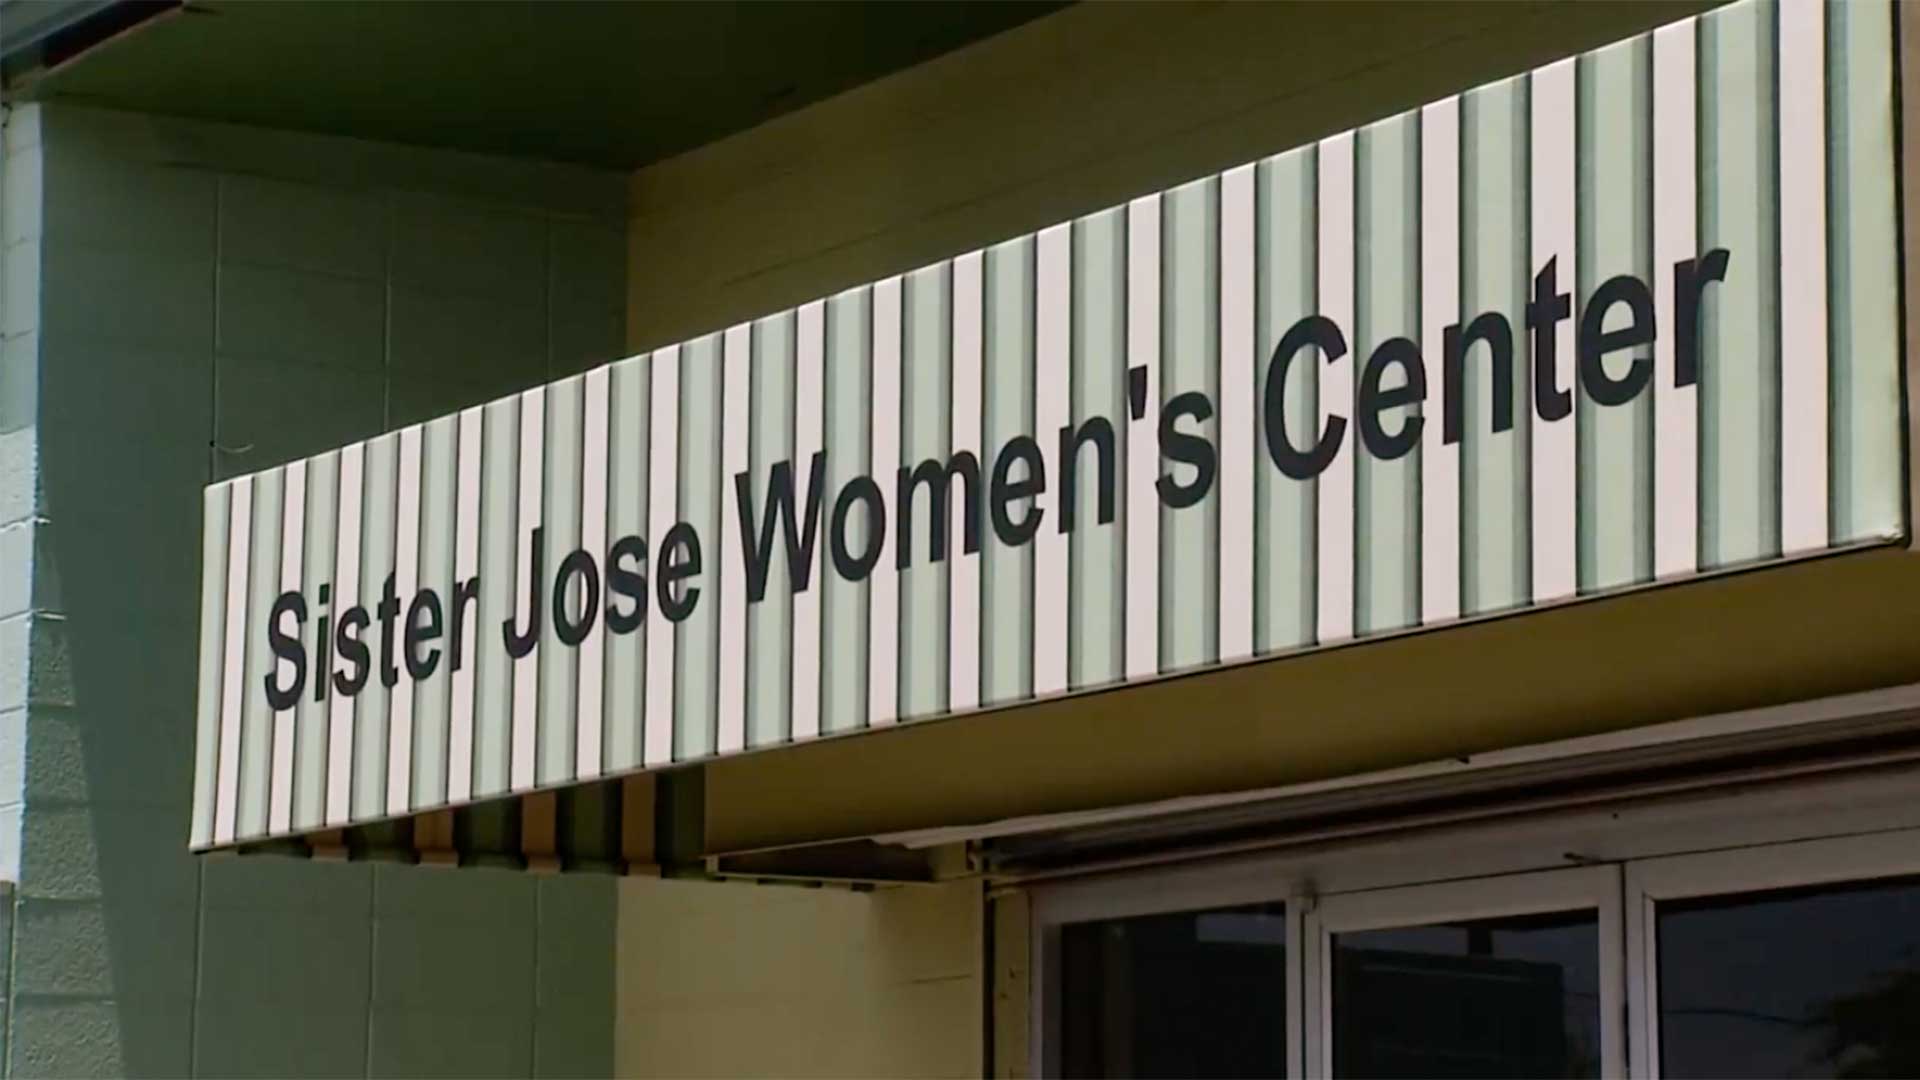 The sign for Sister José Women's Shelter, 2017.